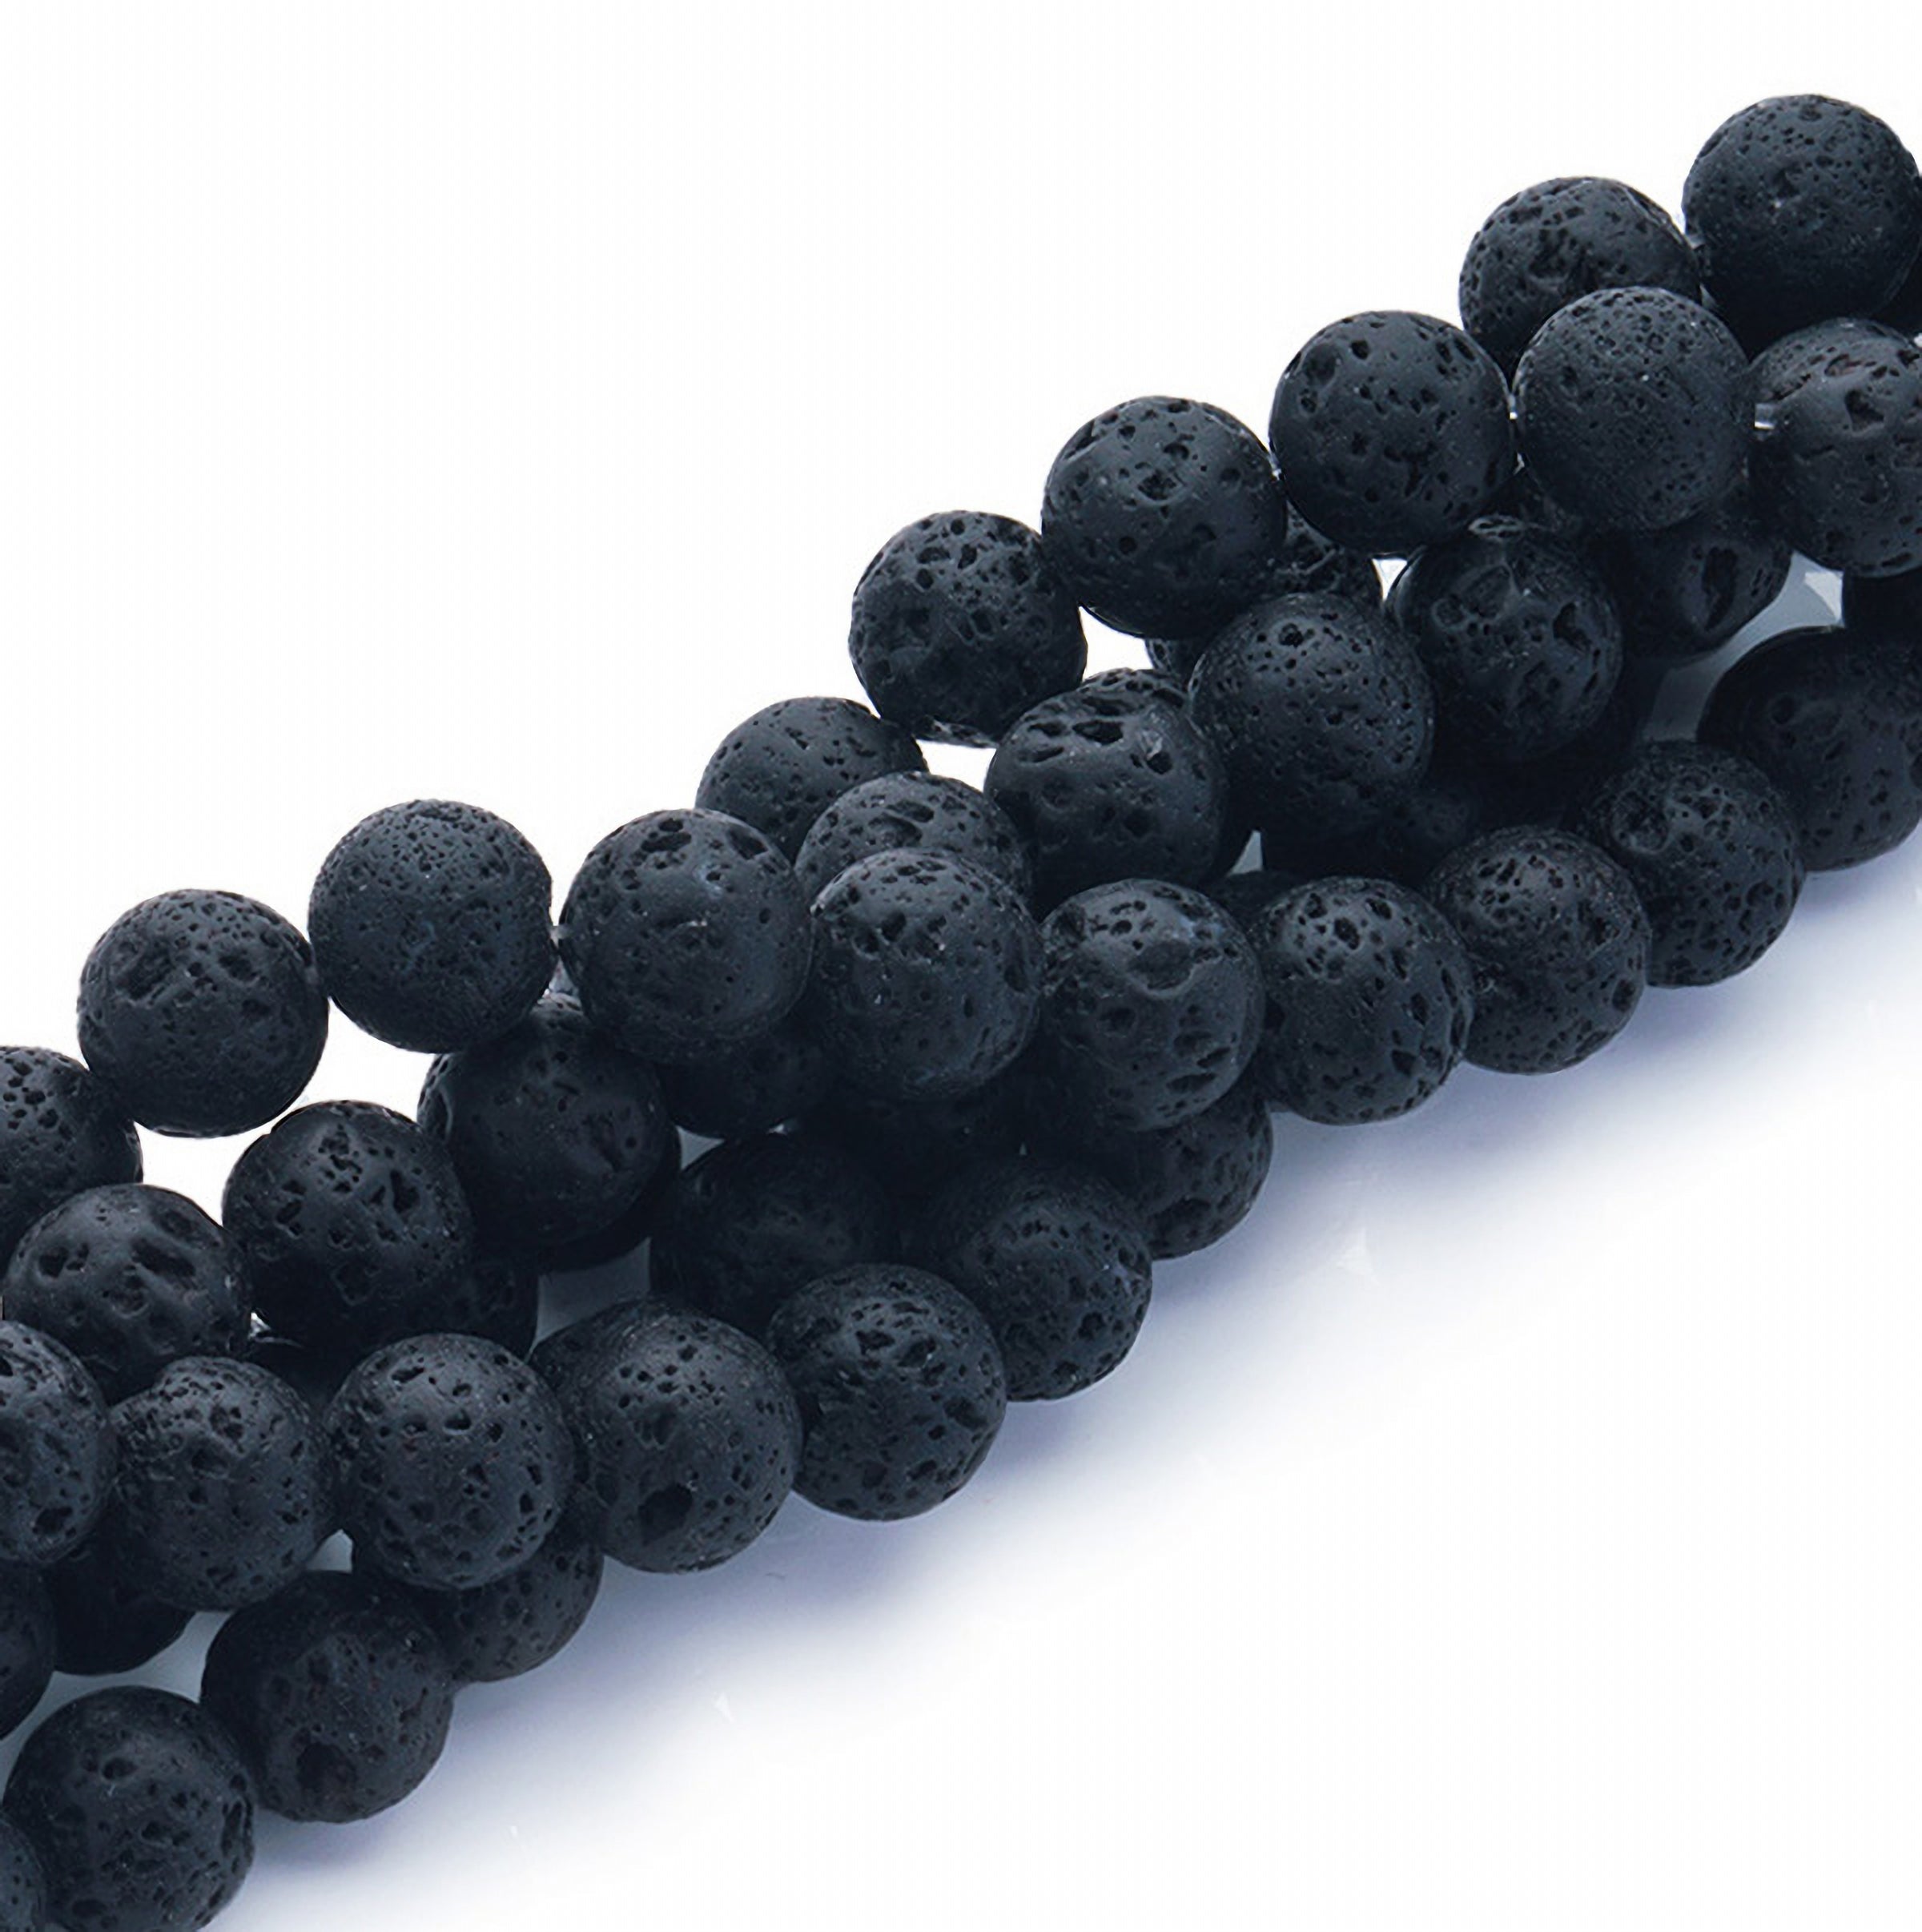 Black lava beads, lava stone beads for DIY jewelry making, affordable semi precious stone beads, great for making mala bracelets and necklaces. porous lava beads, essential oil diffusing beads